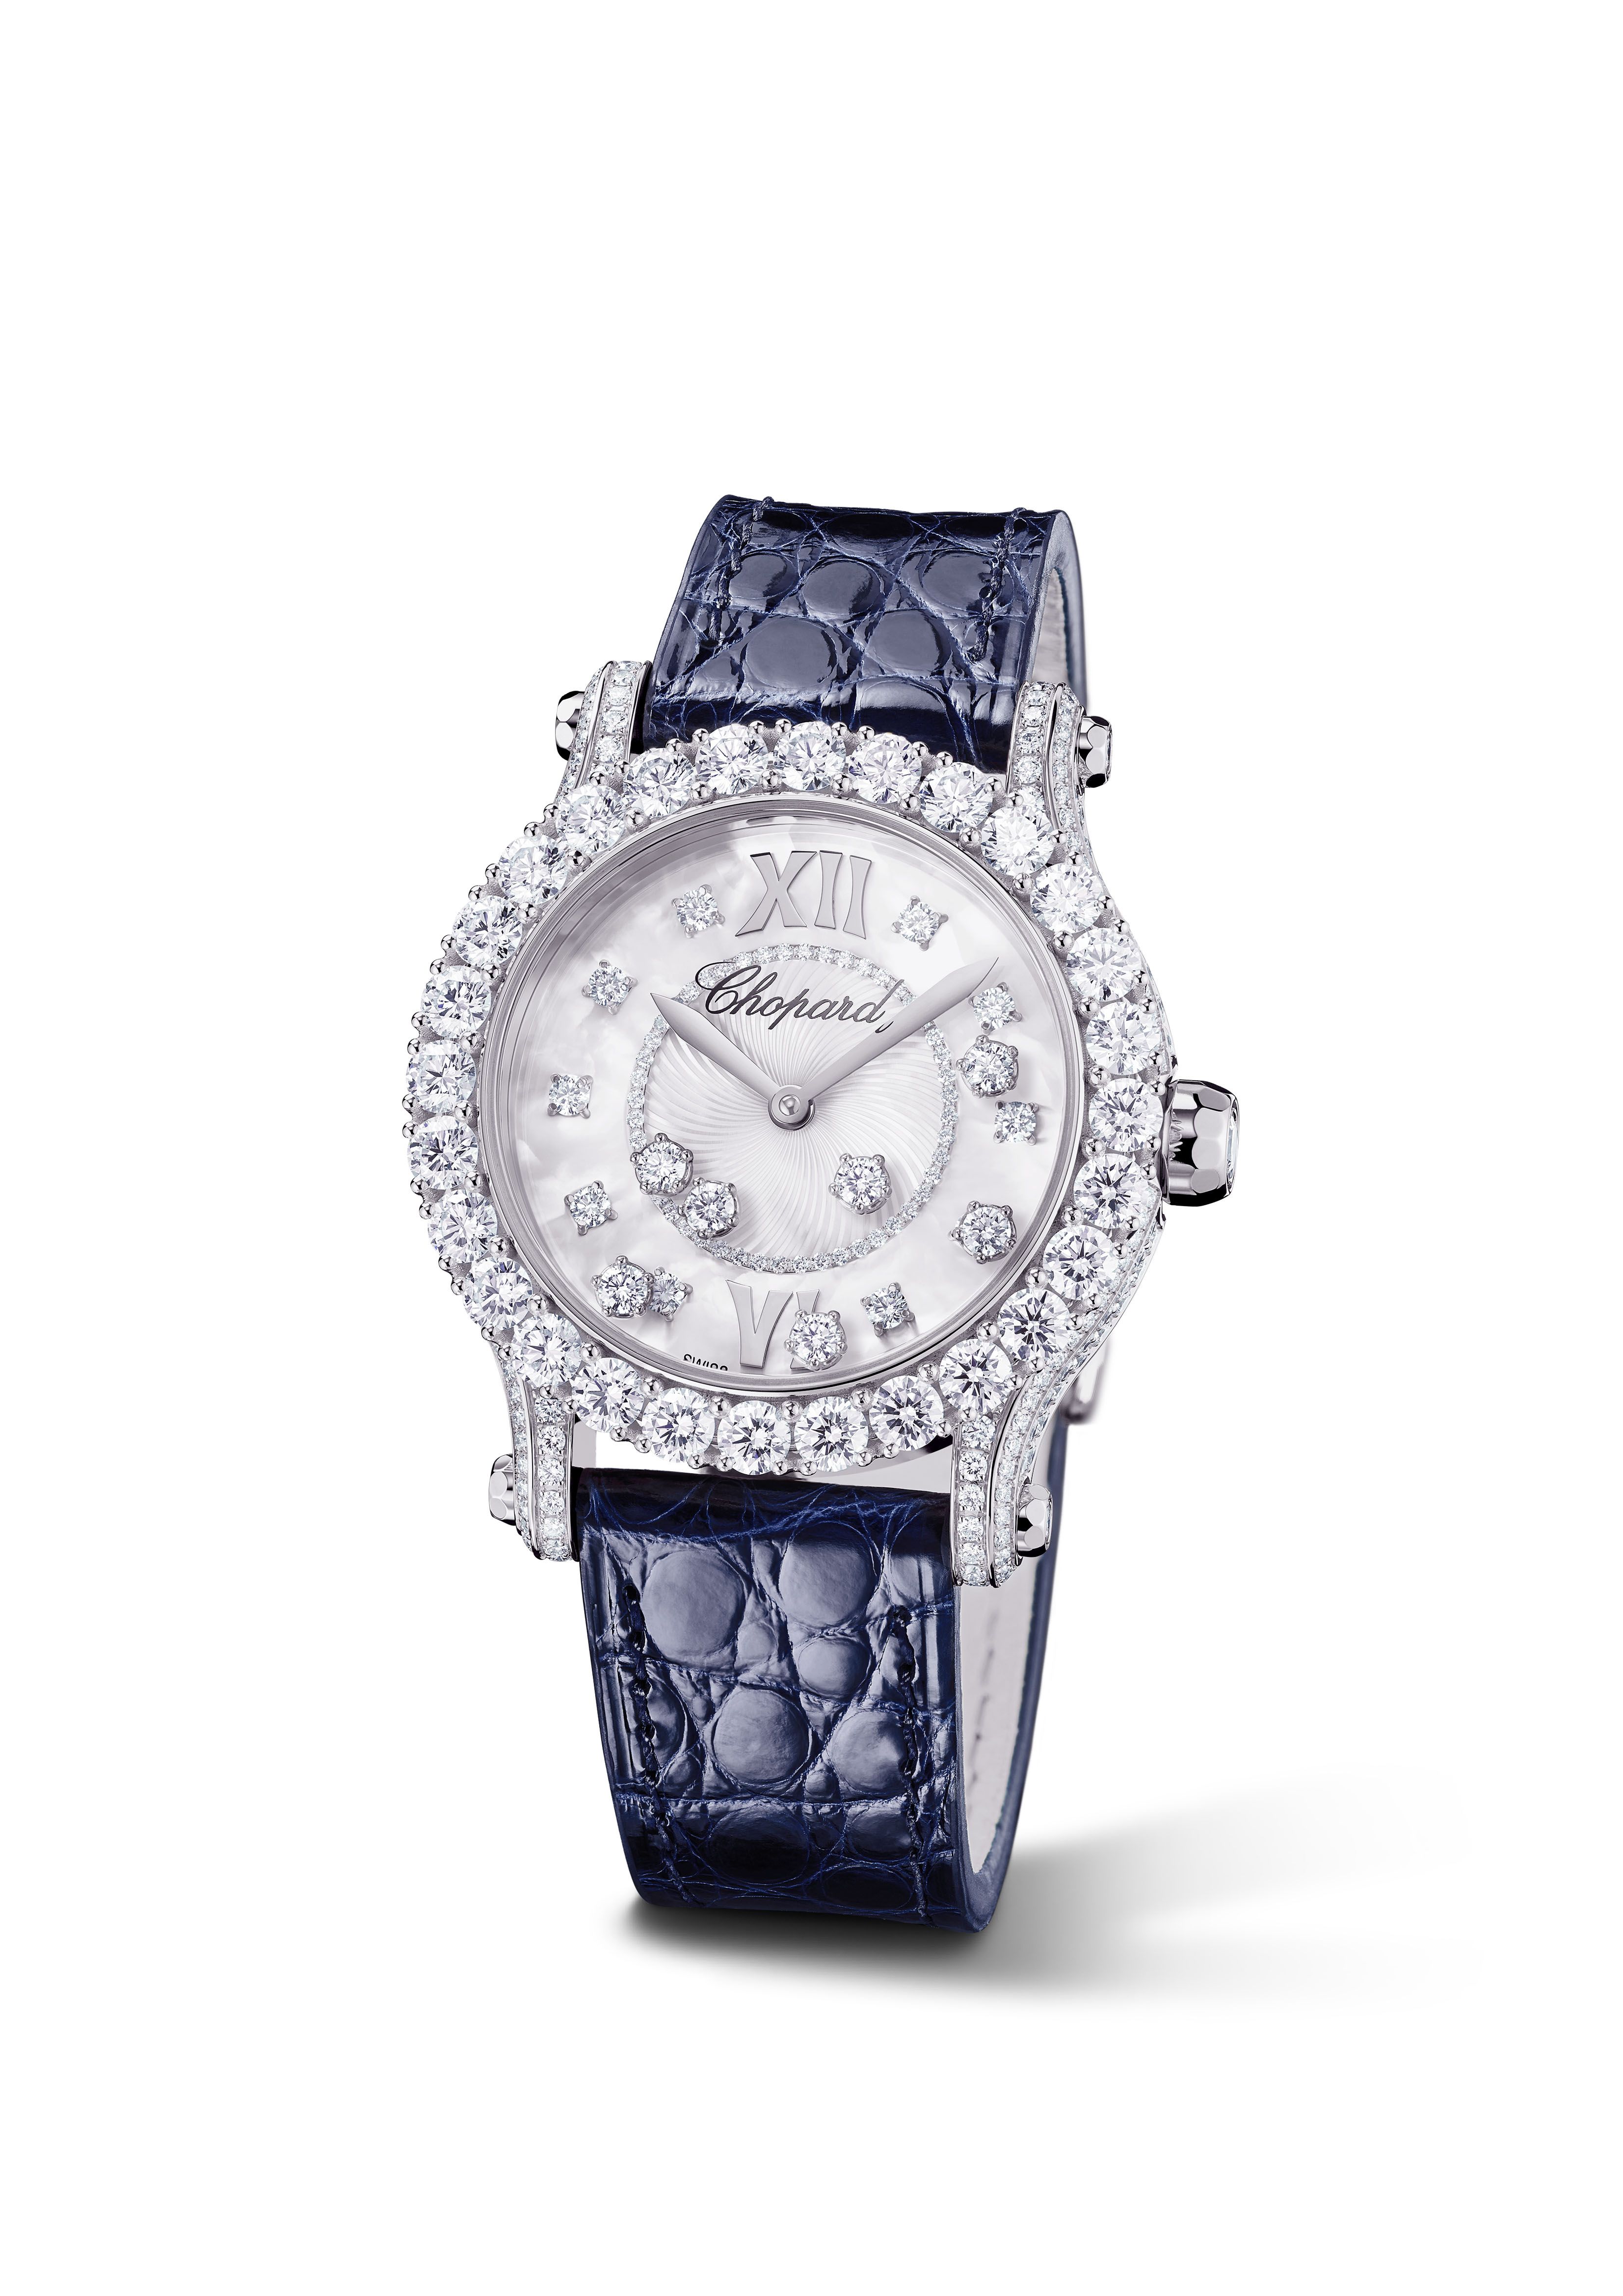 The 10 Most Beautiful and Luxurious Women's Watches of 2020 - Best New  Women's Watches of the Year